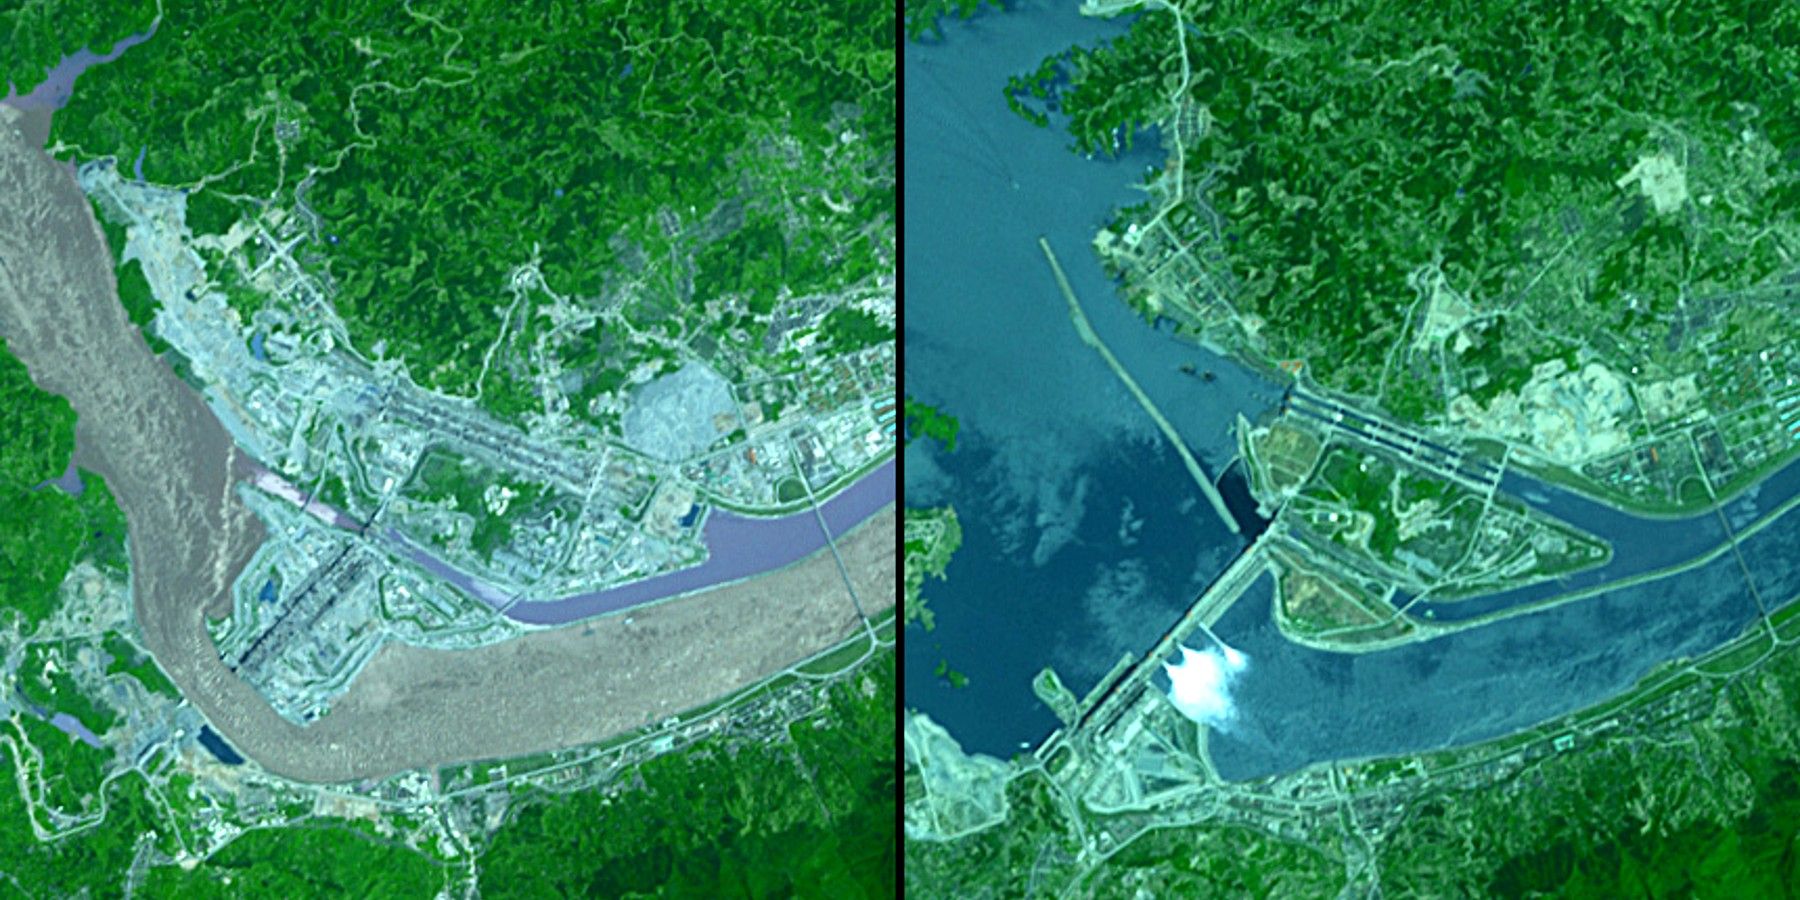 Impacts of the Three Gorges Dam in China.